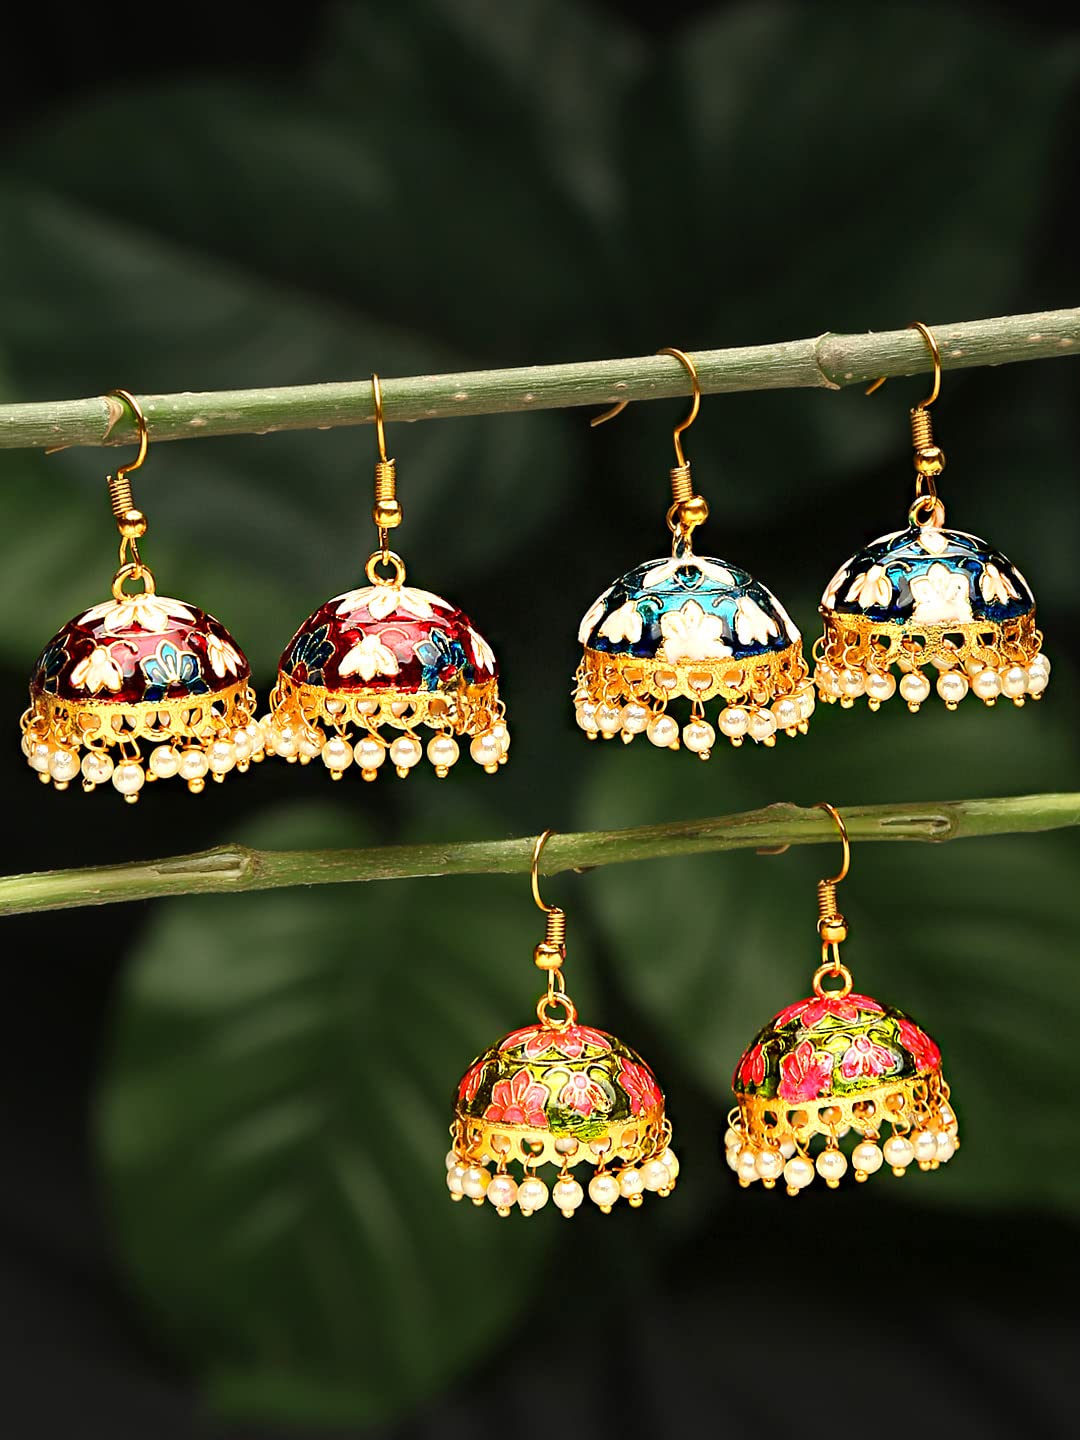 Yellow Chimes Meenakari Jumka Earrings with Ethnic Design Gold Plated Traditional Beads Combo of 3 pair for Women and Girls